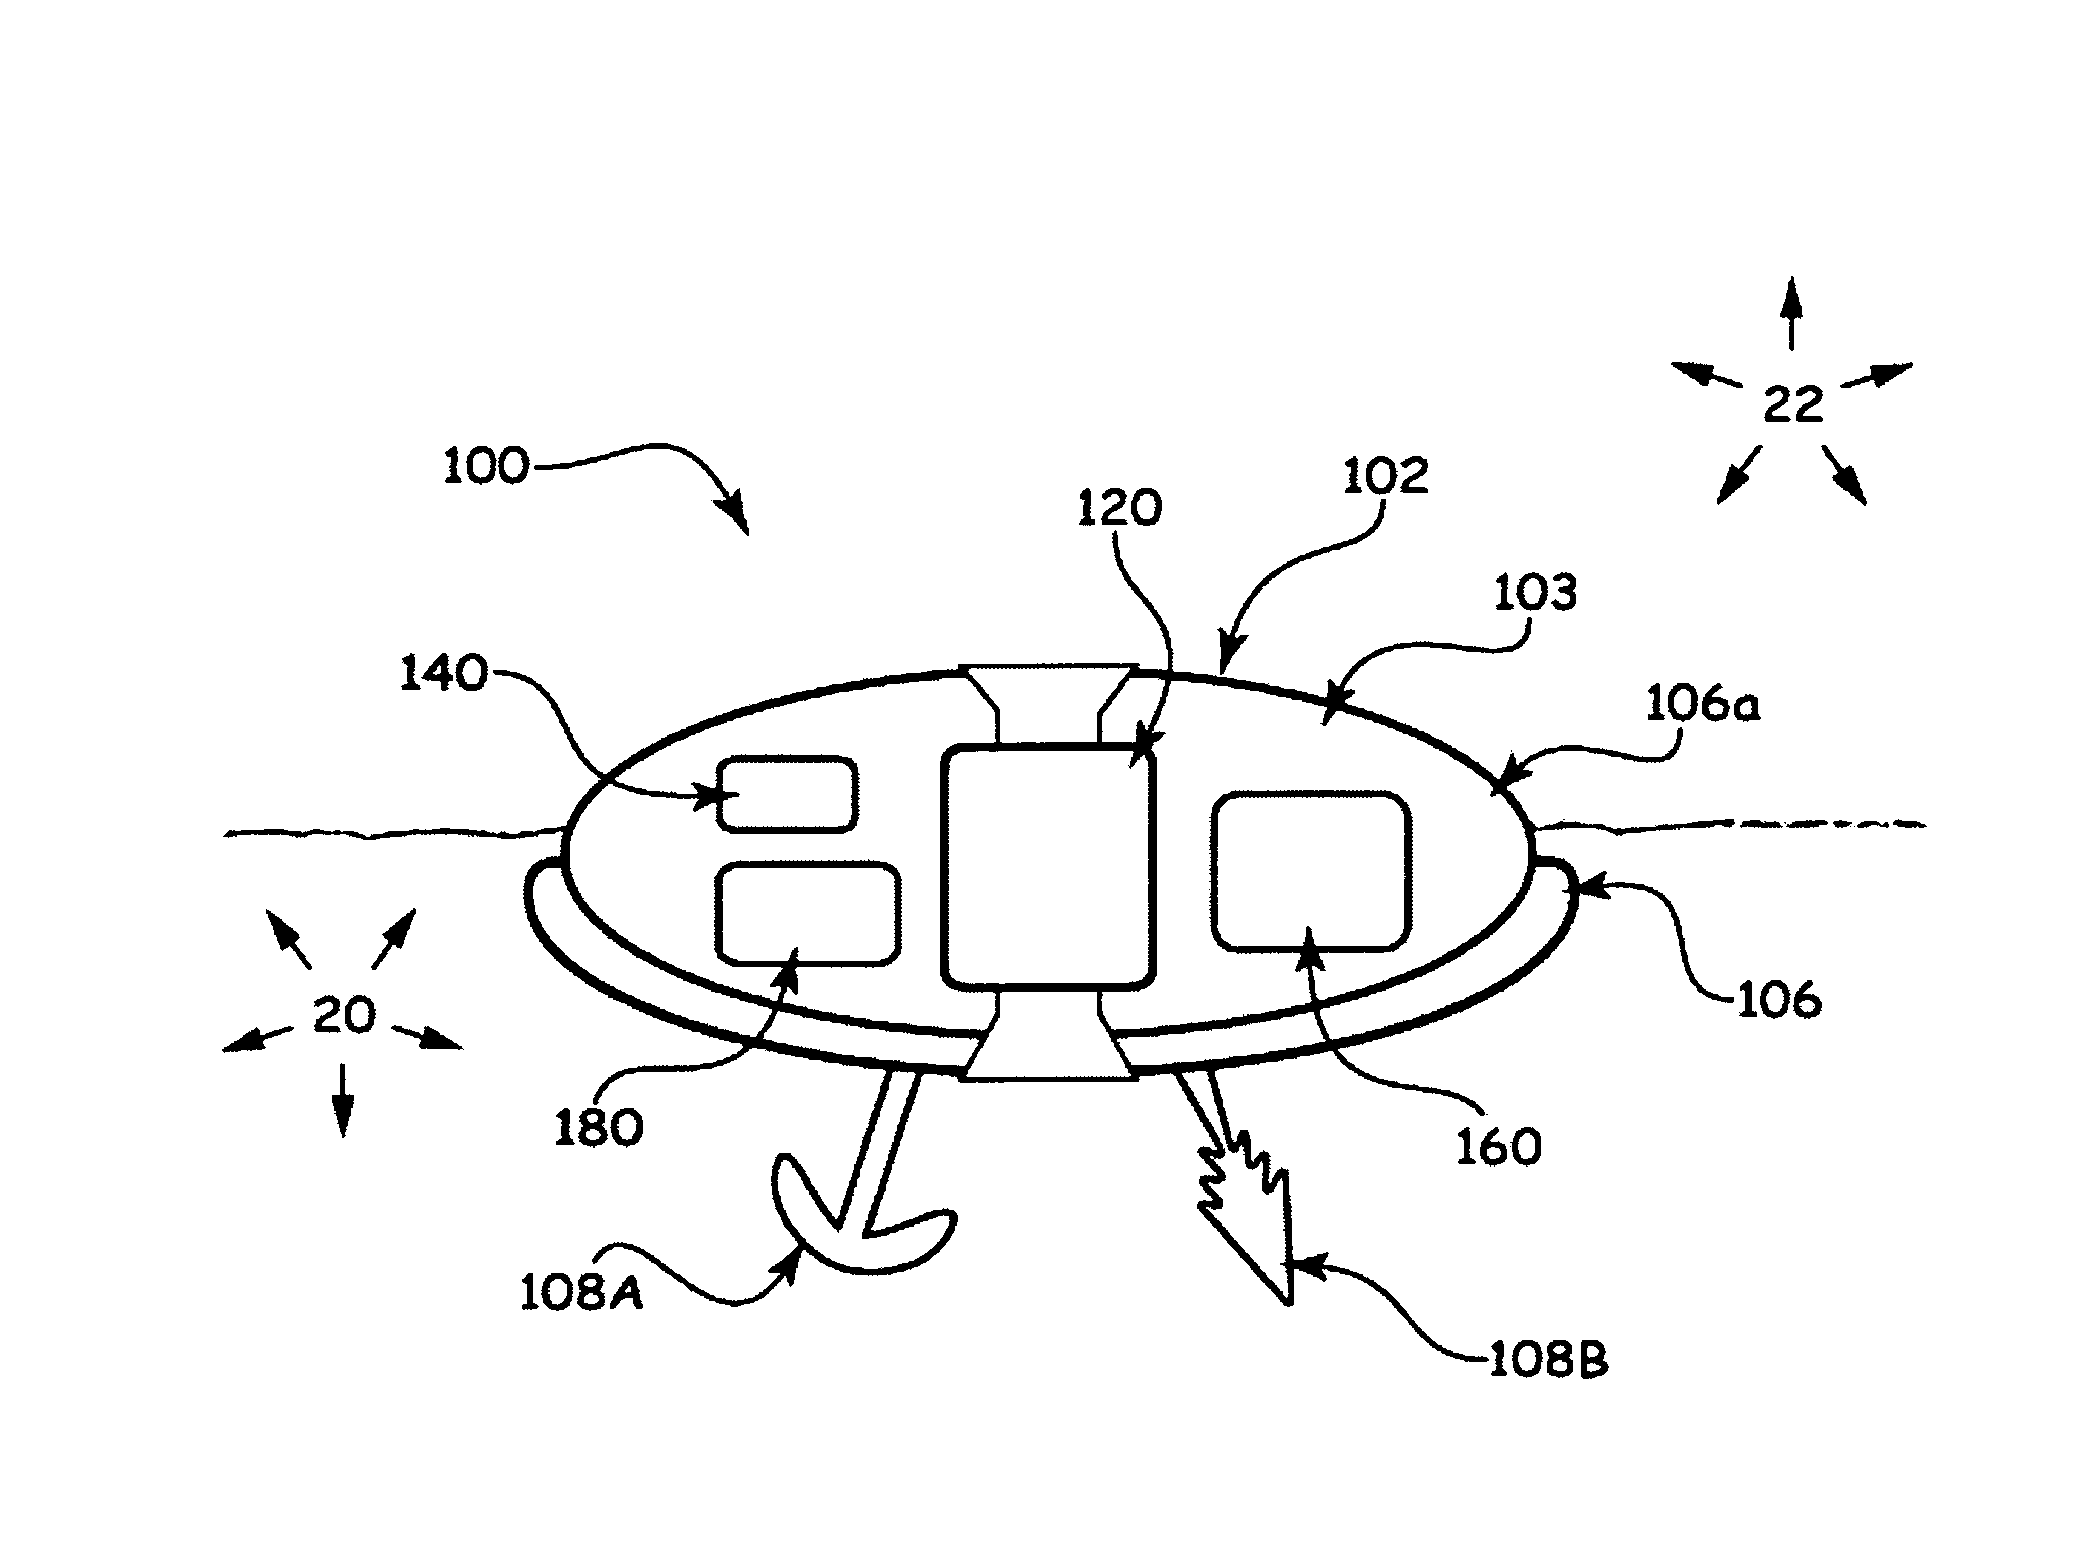 Water submersible electronics assembly and methods of use